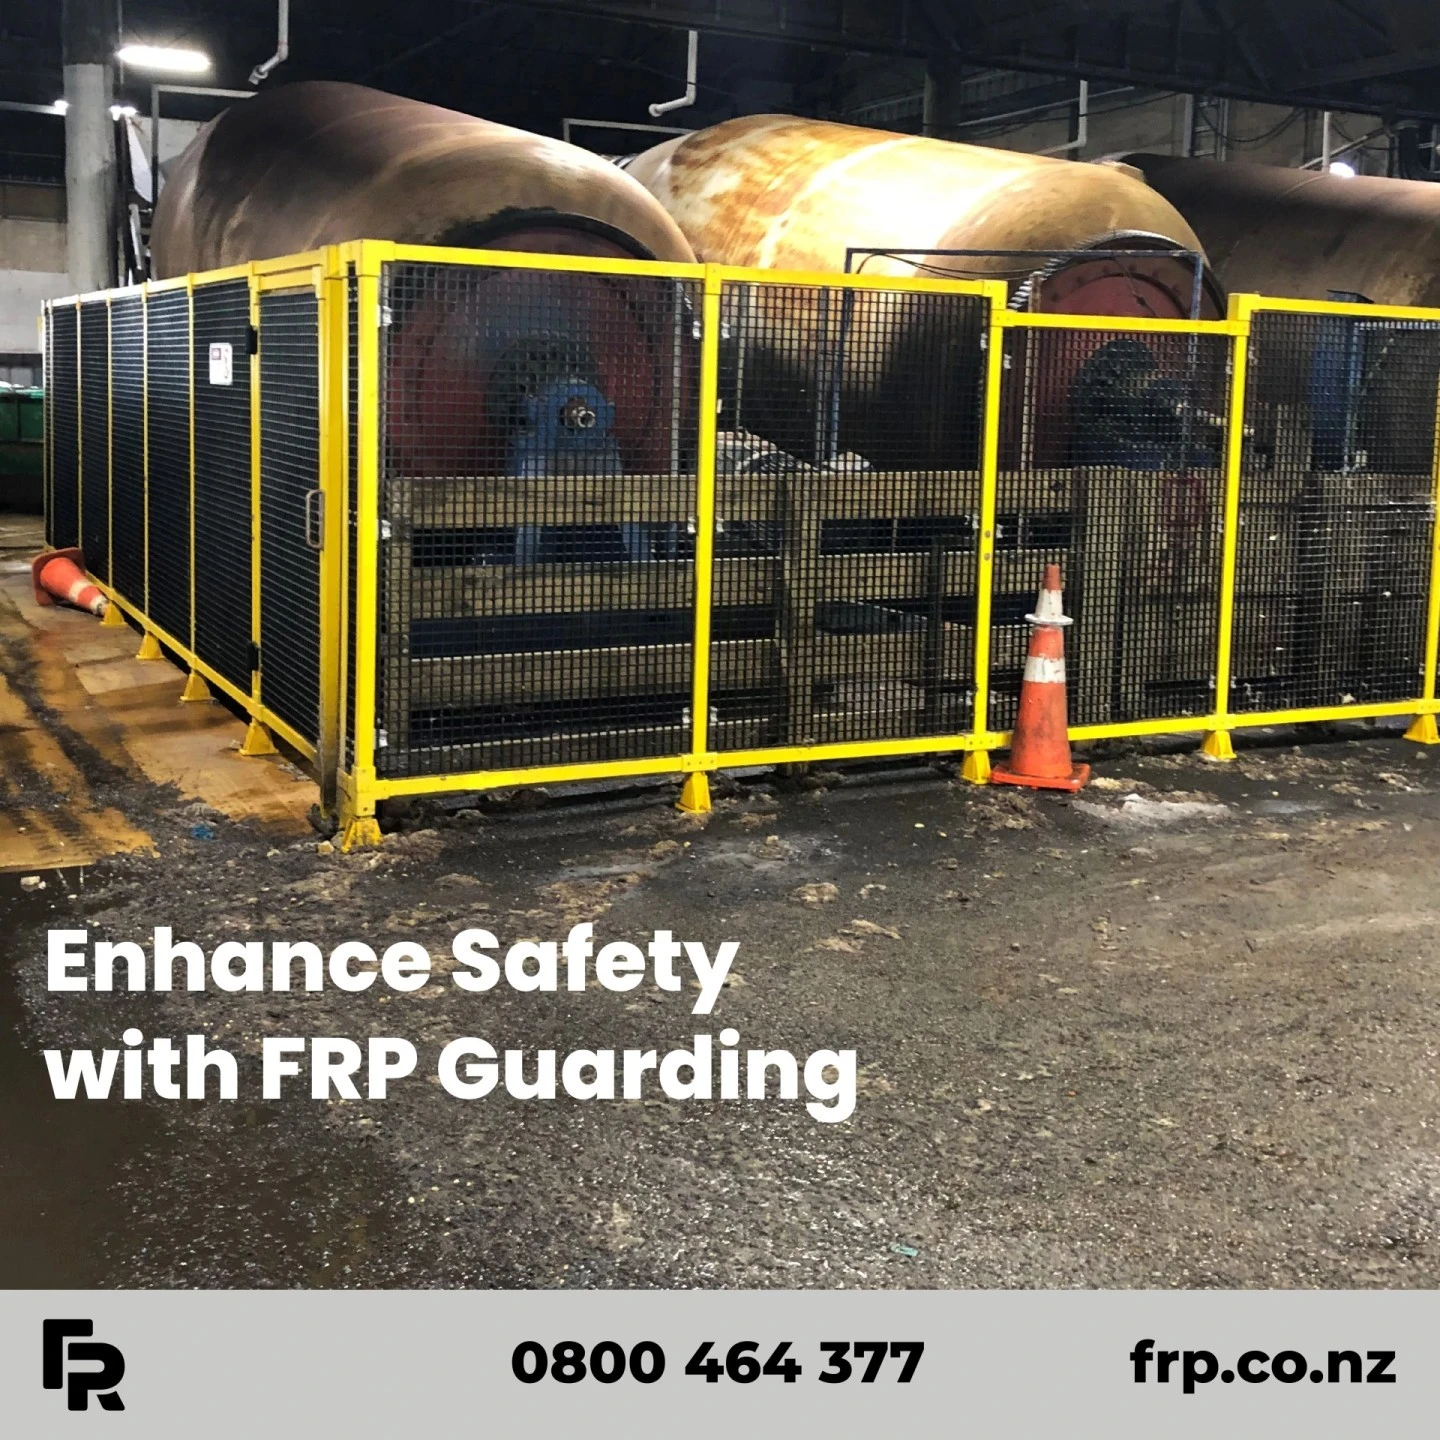 Durable and resistant to corrosion.

#frp #frpproducts #industrial #commercial #machineguarding #engineers #engineering